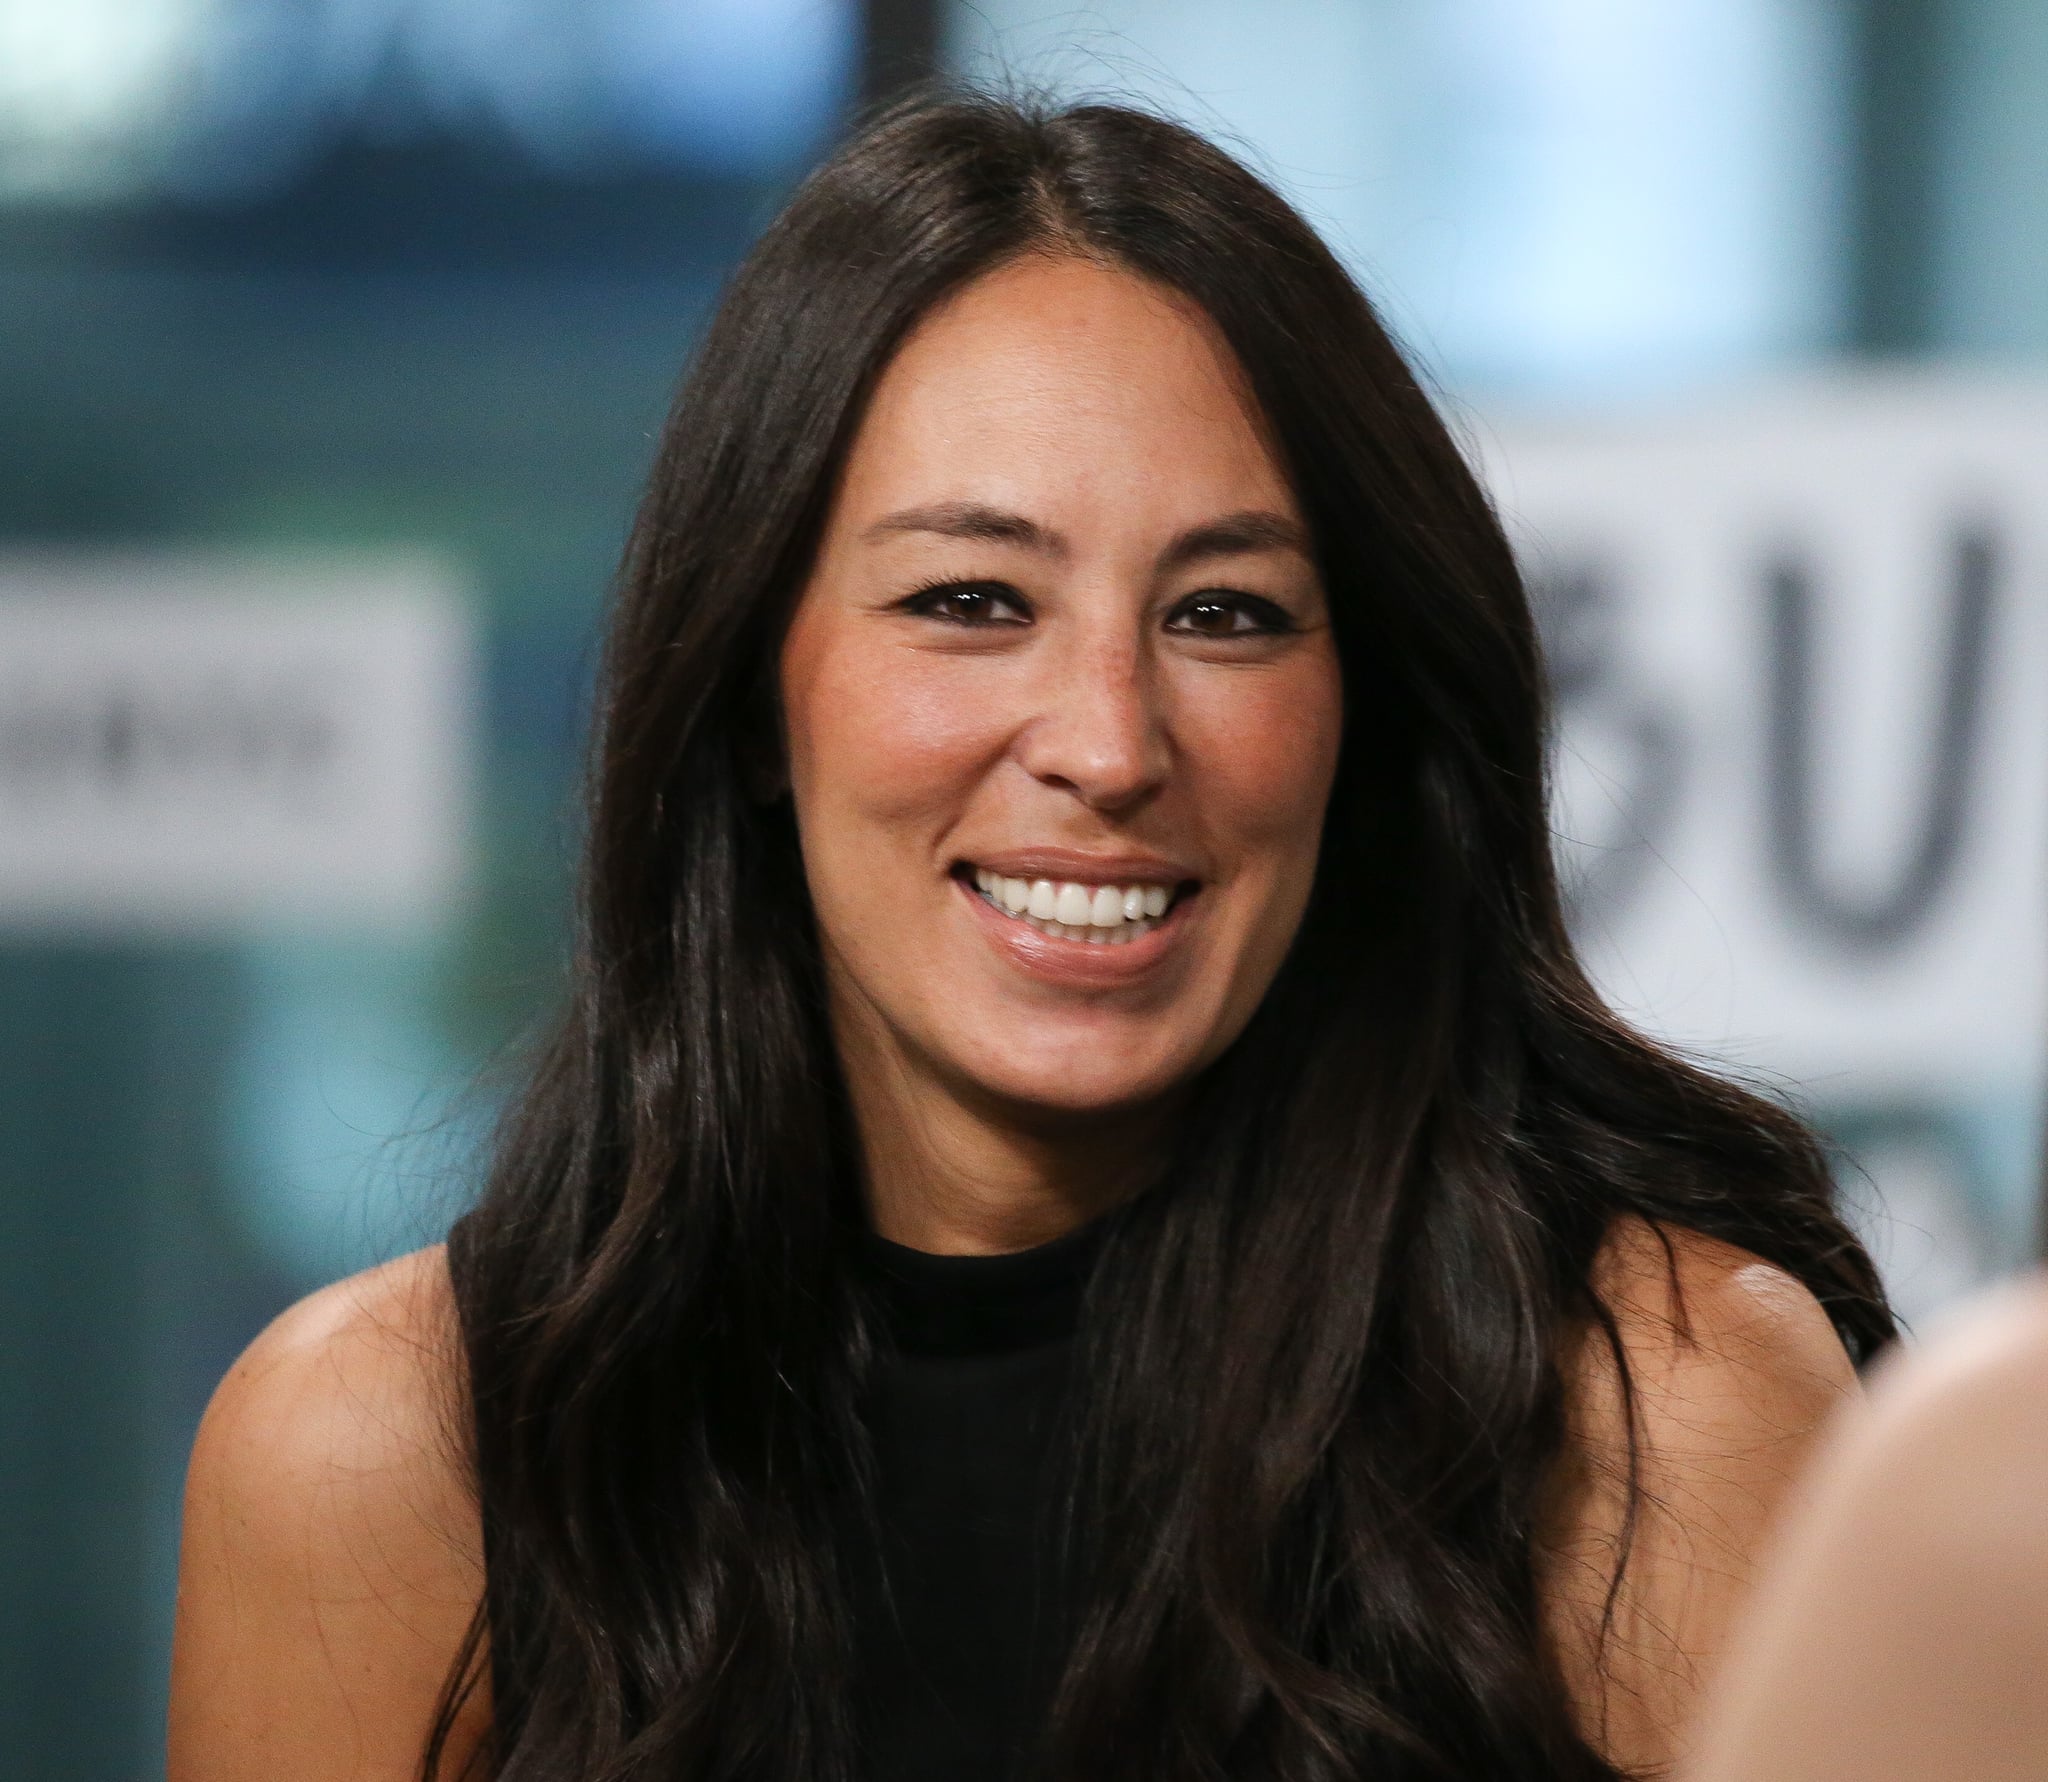 Joanna Gaines Reflects on Her Son Drake Leaving For College